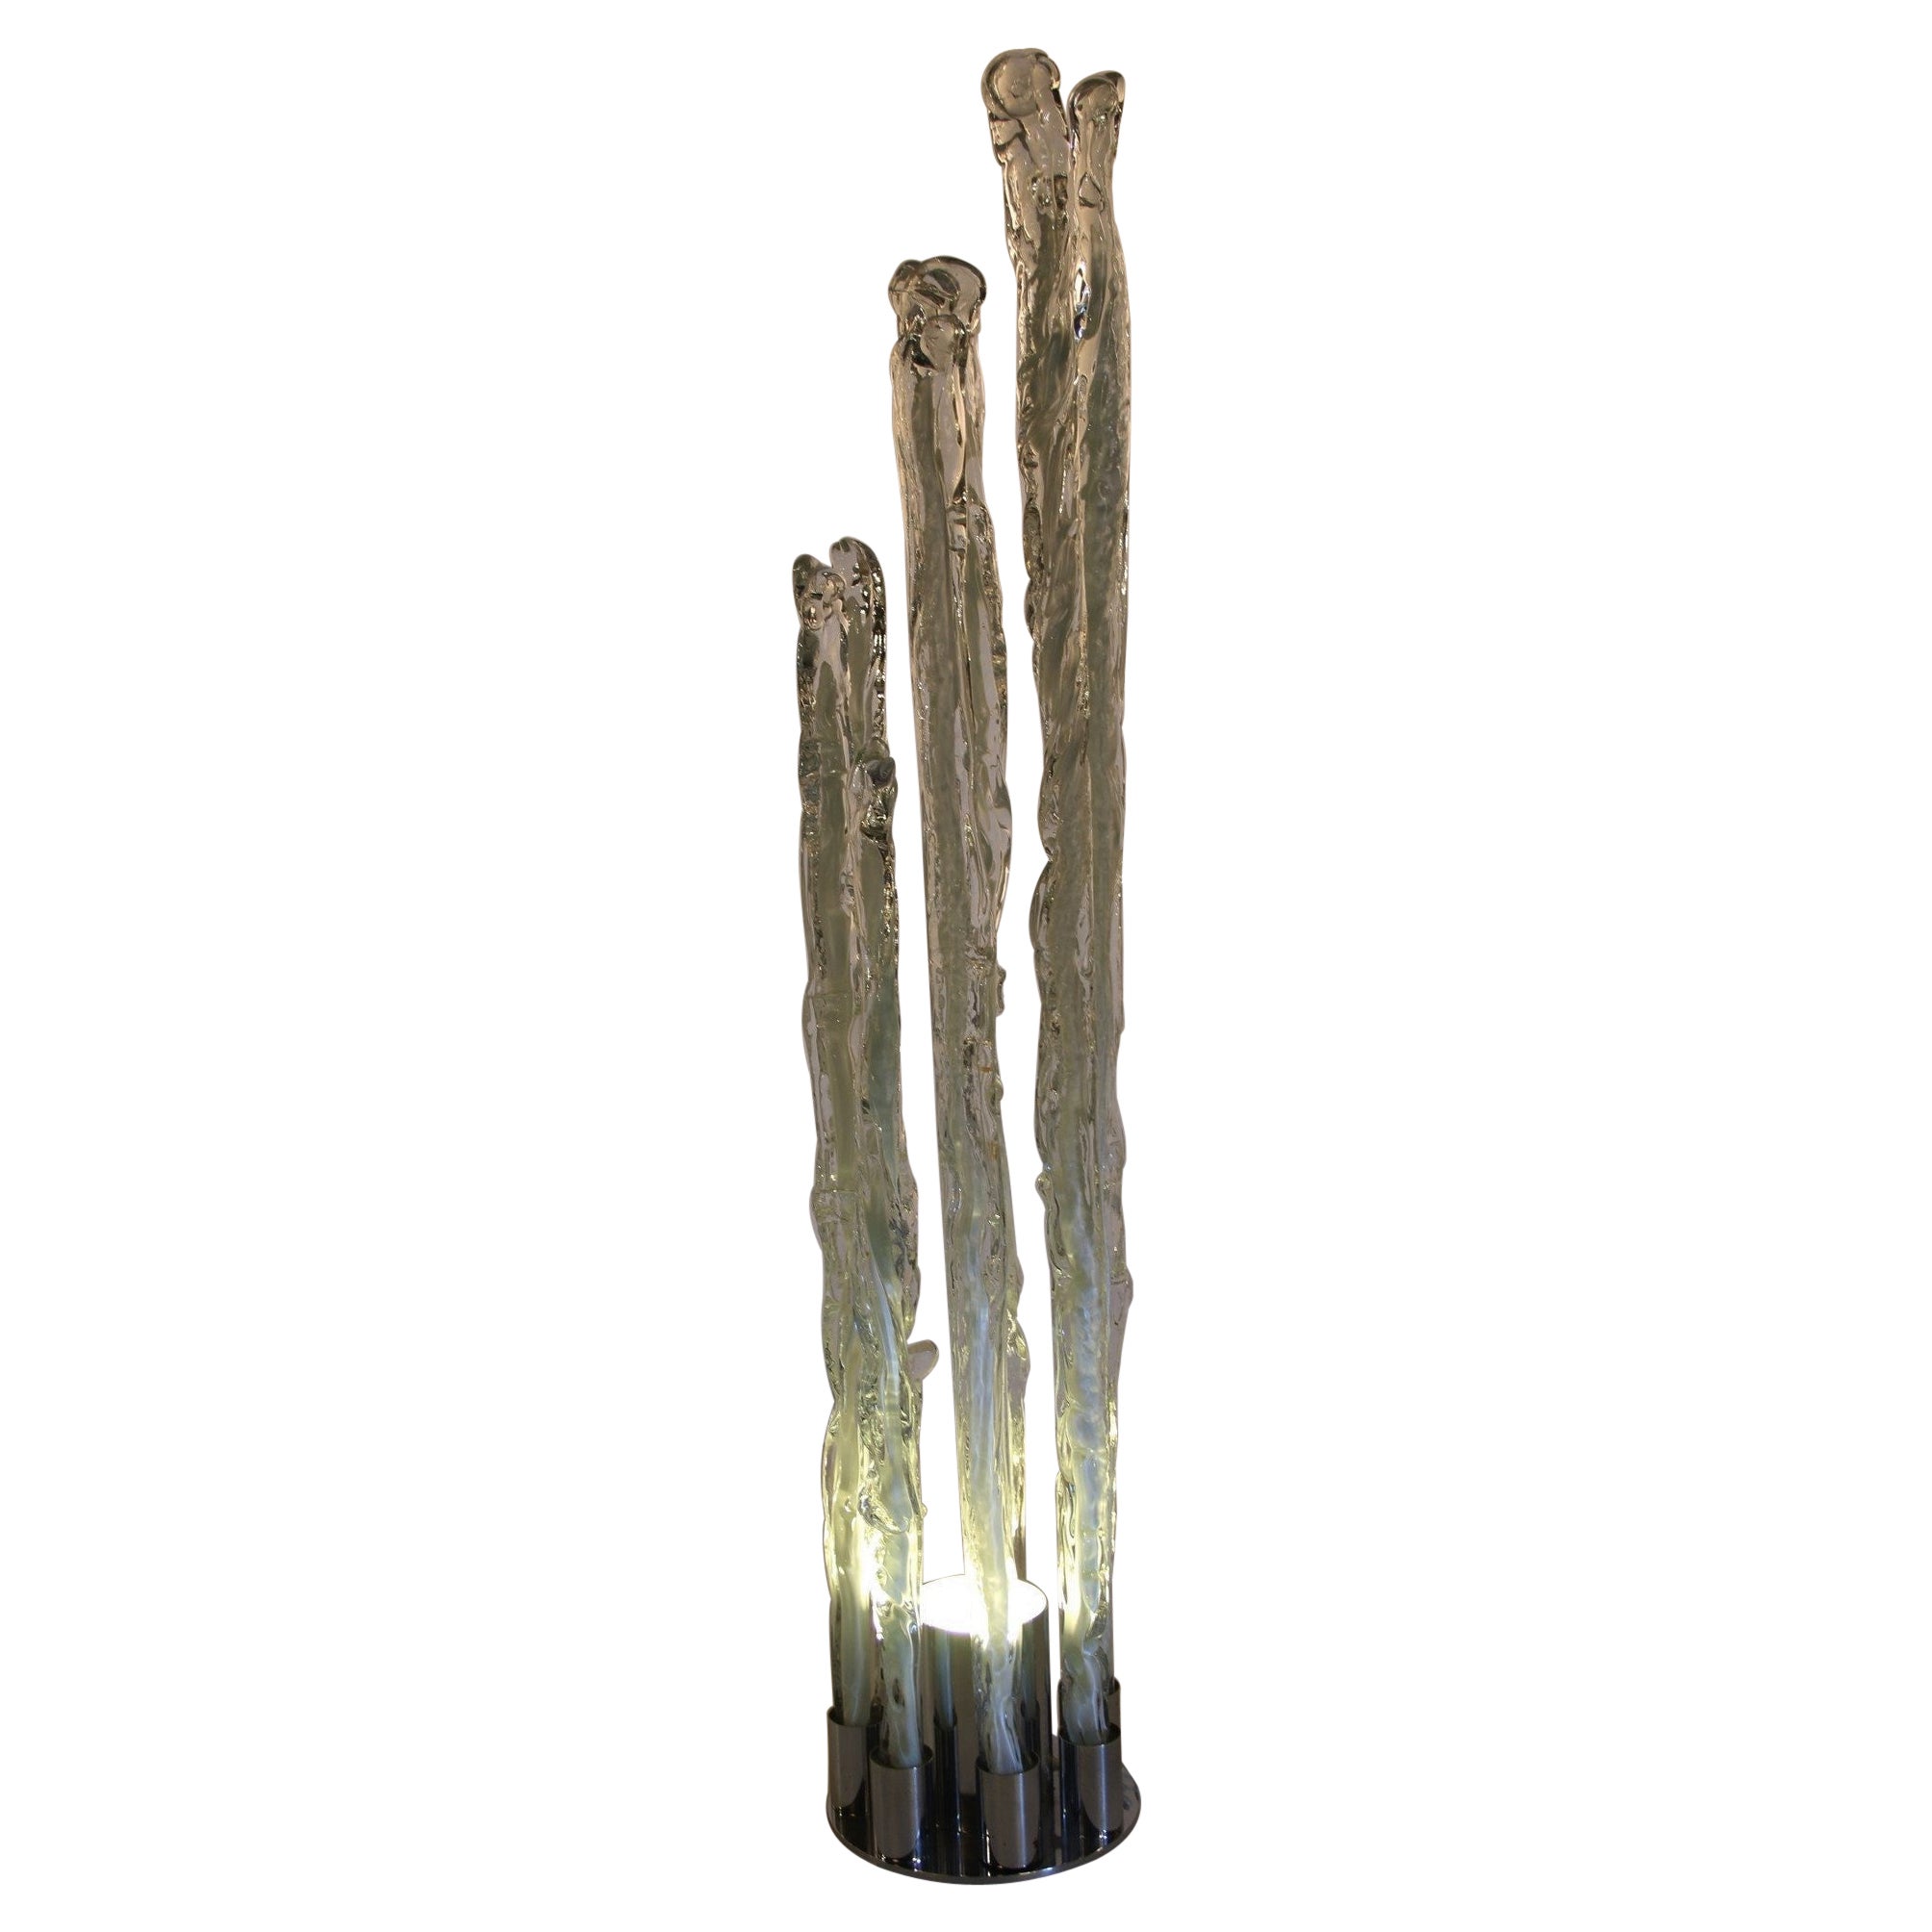 This lamp will be a wonderful statment piece in every interior. Designed by Italian designers Ettore Fantasia and Gino Poli around the 1960s. 

The foot of this beautiful Excalibur Ice floor lamp is made of chrome. The seven ice-like pillars are